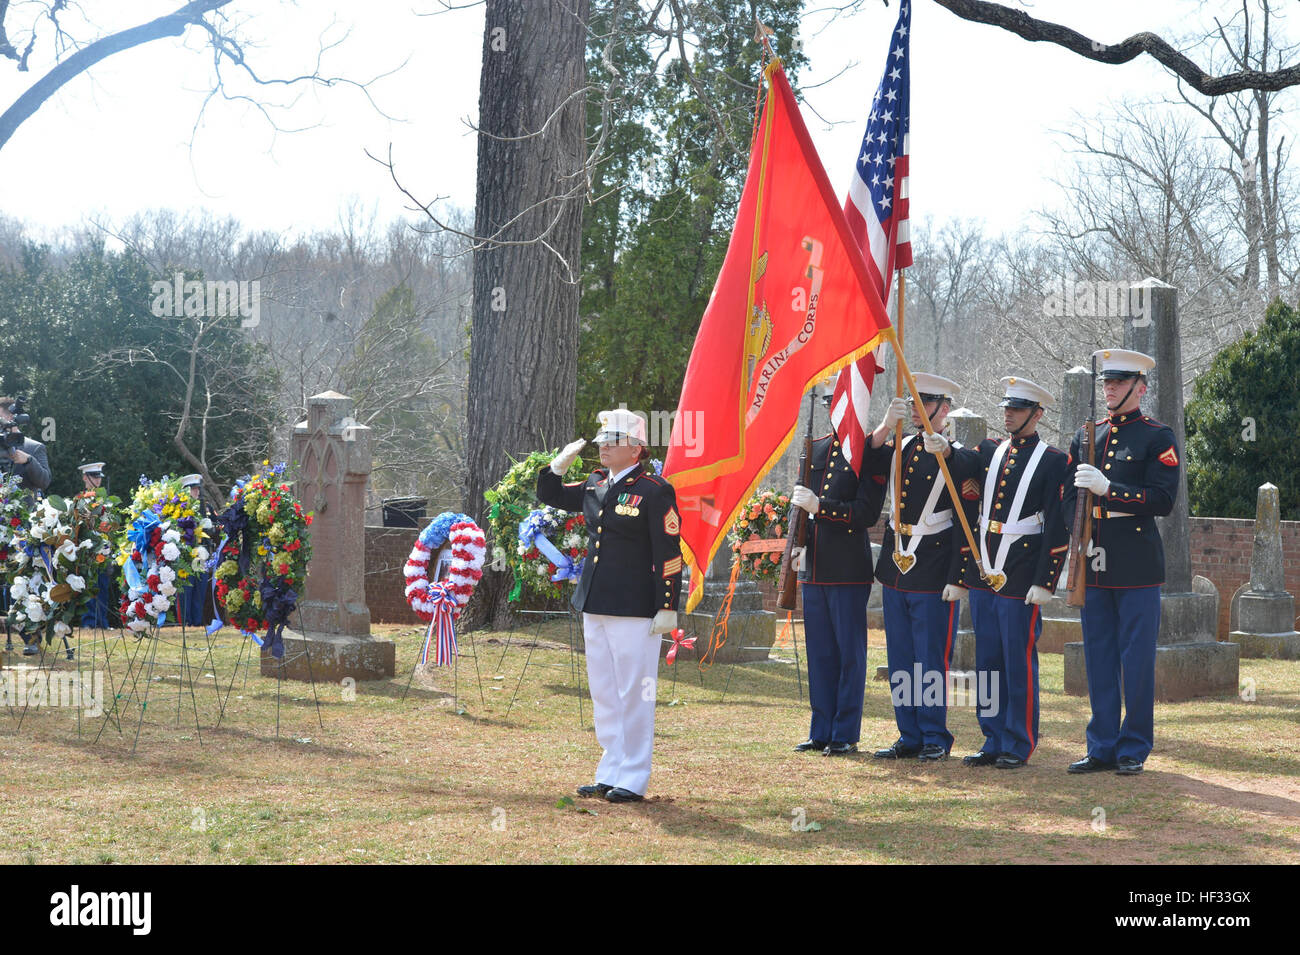 U.S. Marines with Marine Corps Base Quantico's Color Guard salute during the playing of the National Anthem at the Presidential wreath laying ceremony held at the final resting place of the 4th President of the United States, James Madison, also known as the Father of the Constitution, at his home at Montpelier, Orange, Va., March 16, 2015. This event was held in commemoration of the 264th anniversary of the birthdate of Madison, and has also been decreed as James Madison Appreciation Day for the Commonwealth of Virginia. (Official United States Marine Corps photo by Staff Sgt. Sarah R. Hickor Stock Photo